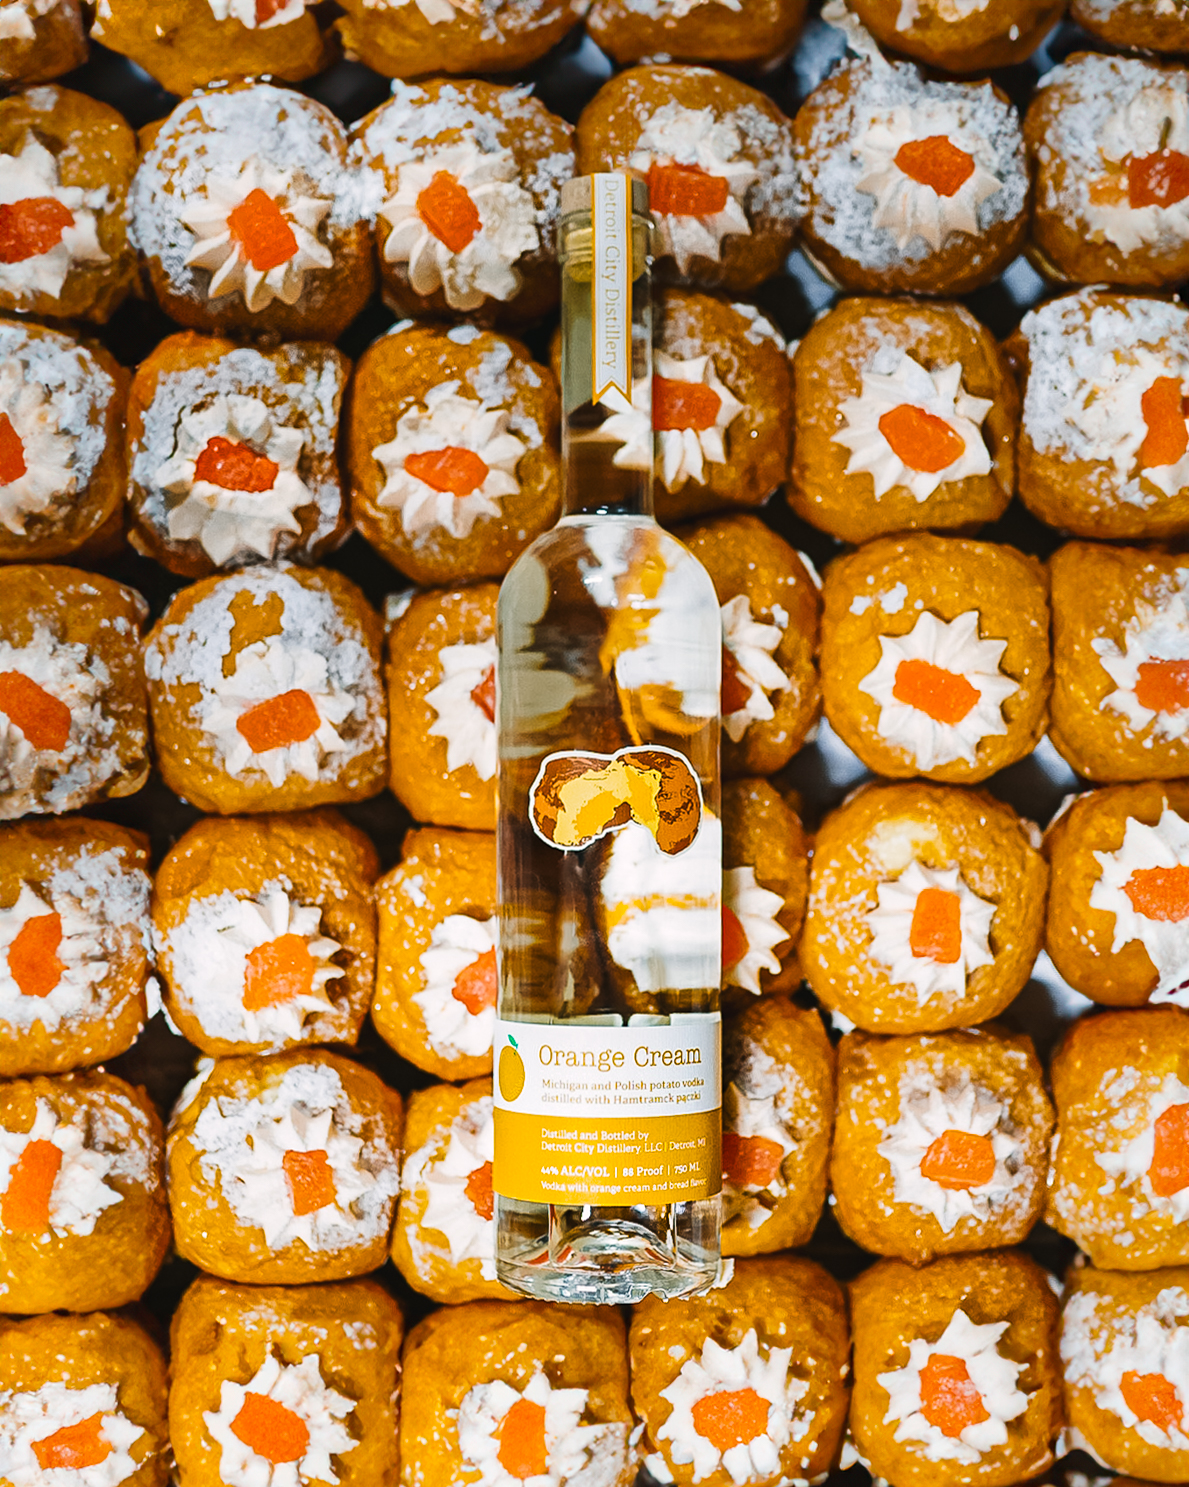 Orange cream paczki with jelly and creaming popping out of the top and a clear bottle of vodka with orange and white labels.